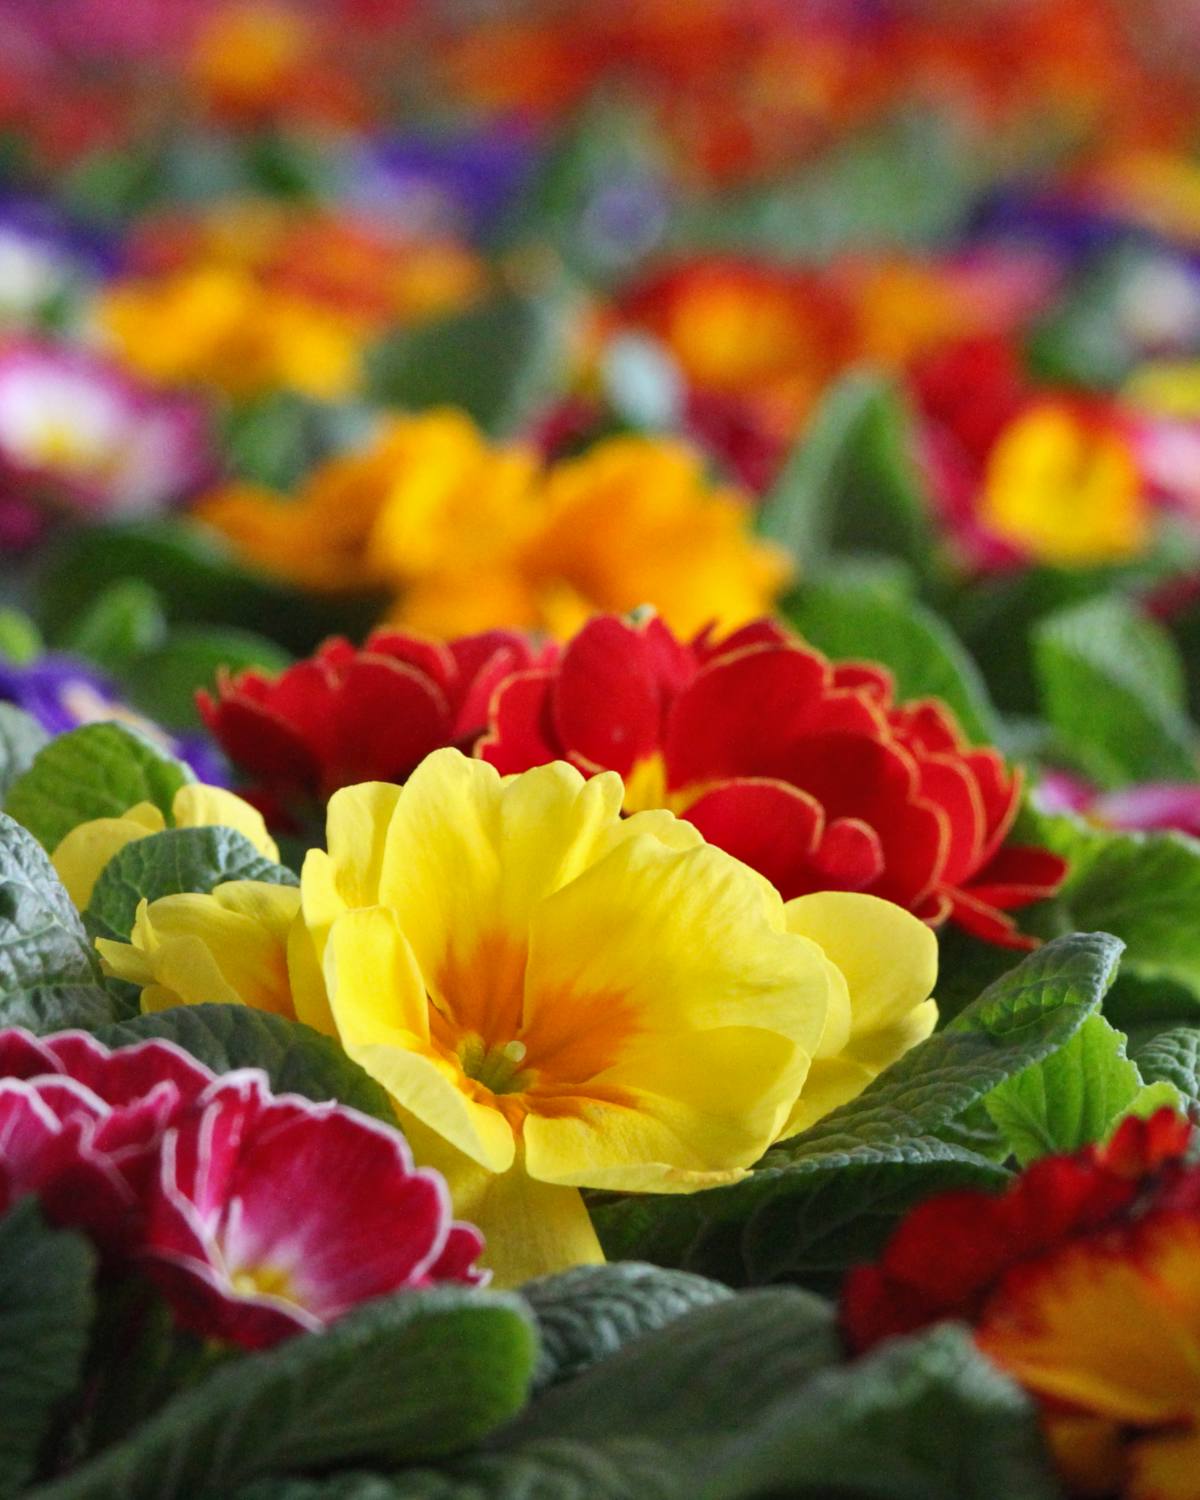 Primrose   planting and advice on caring for this winter blooming ...